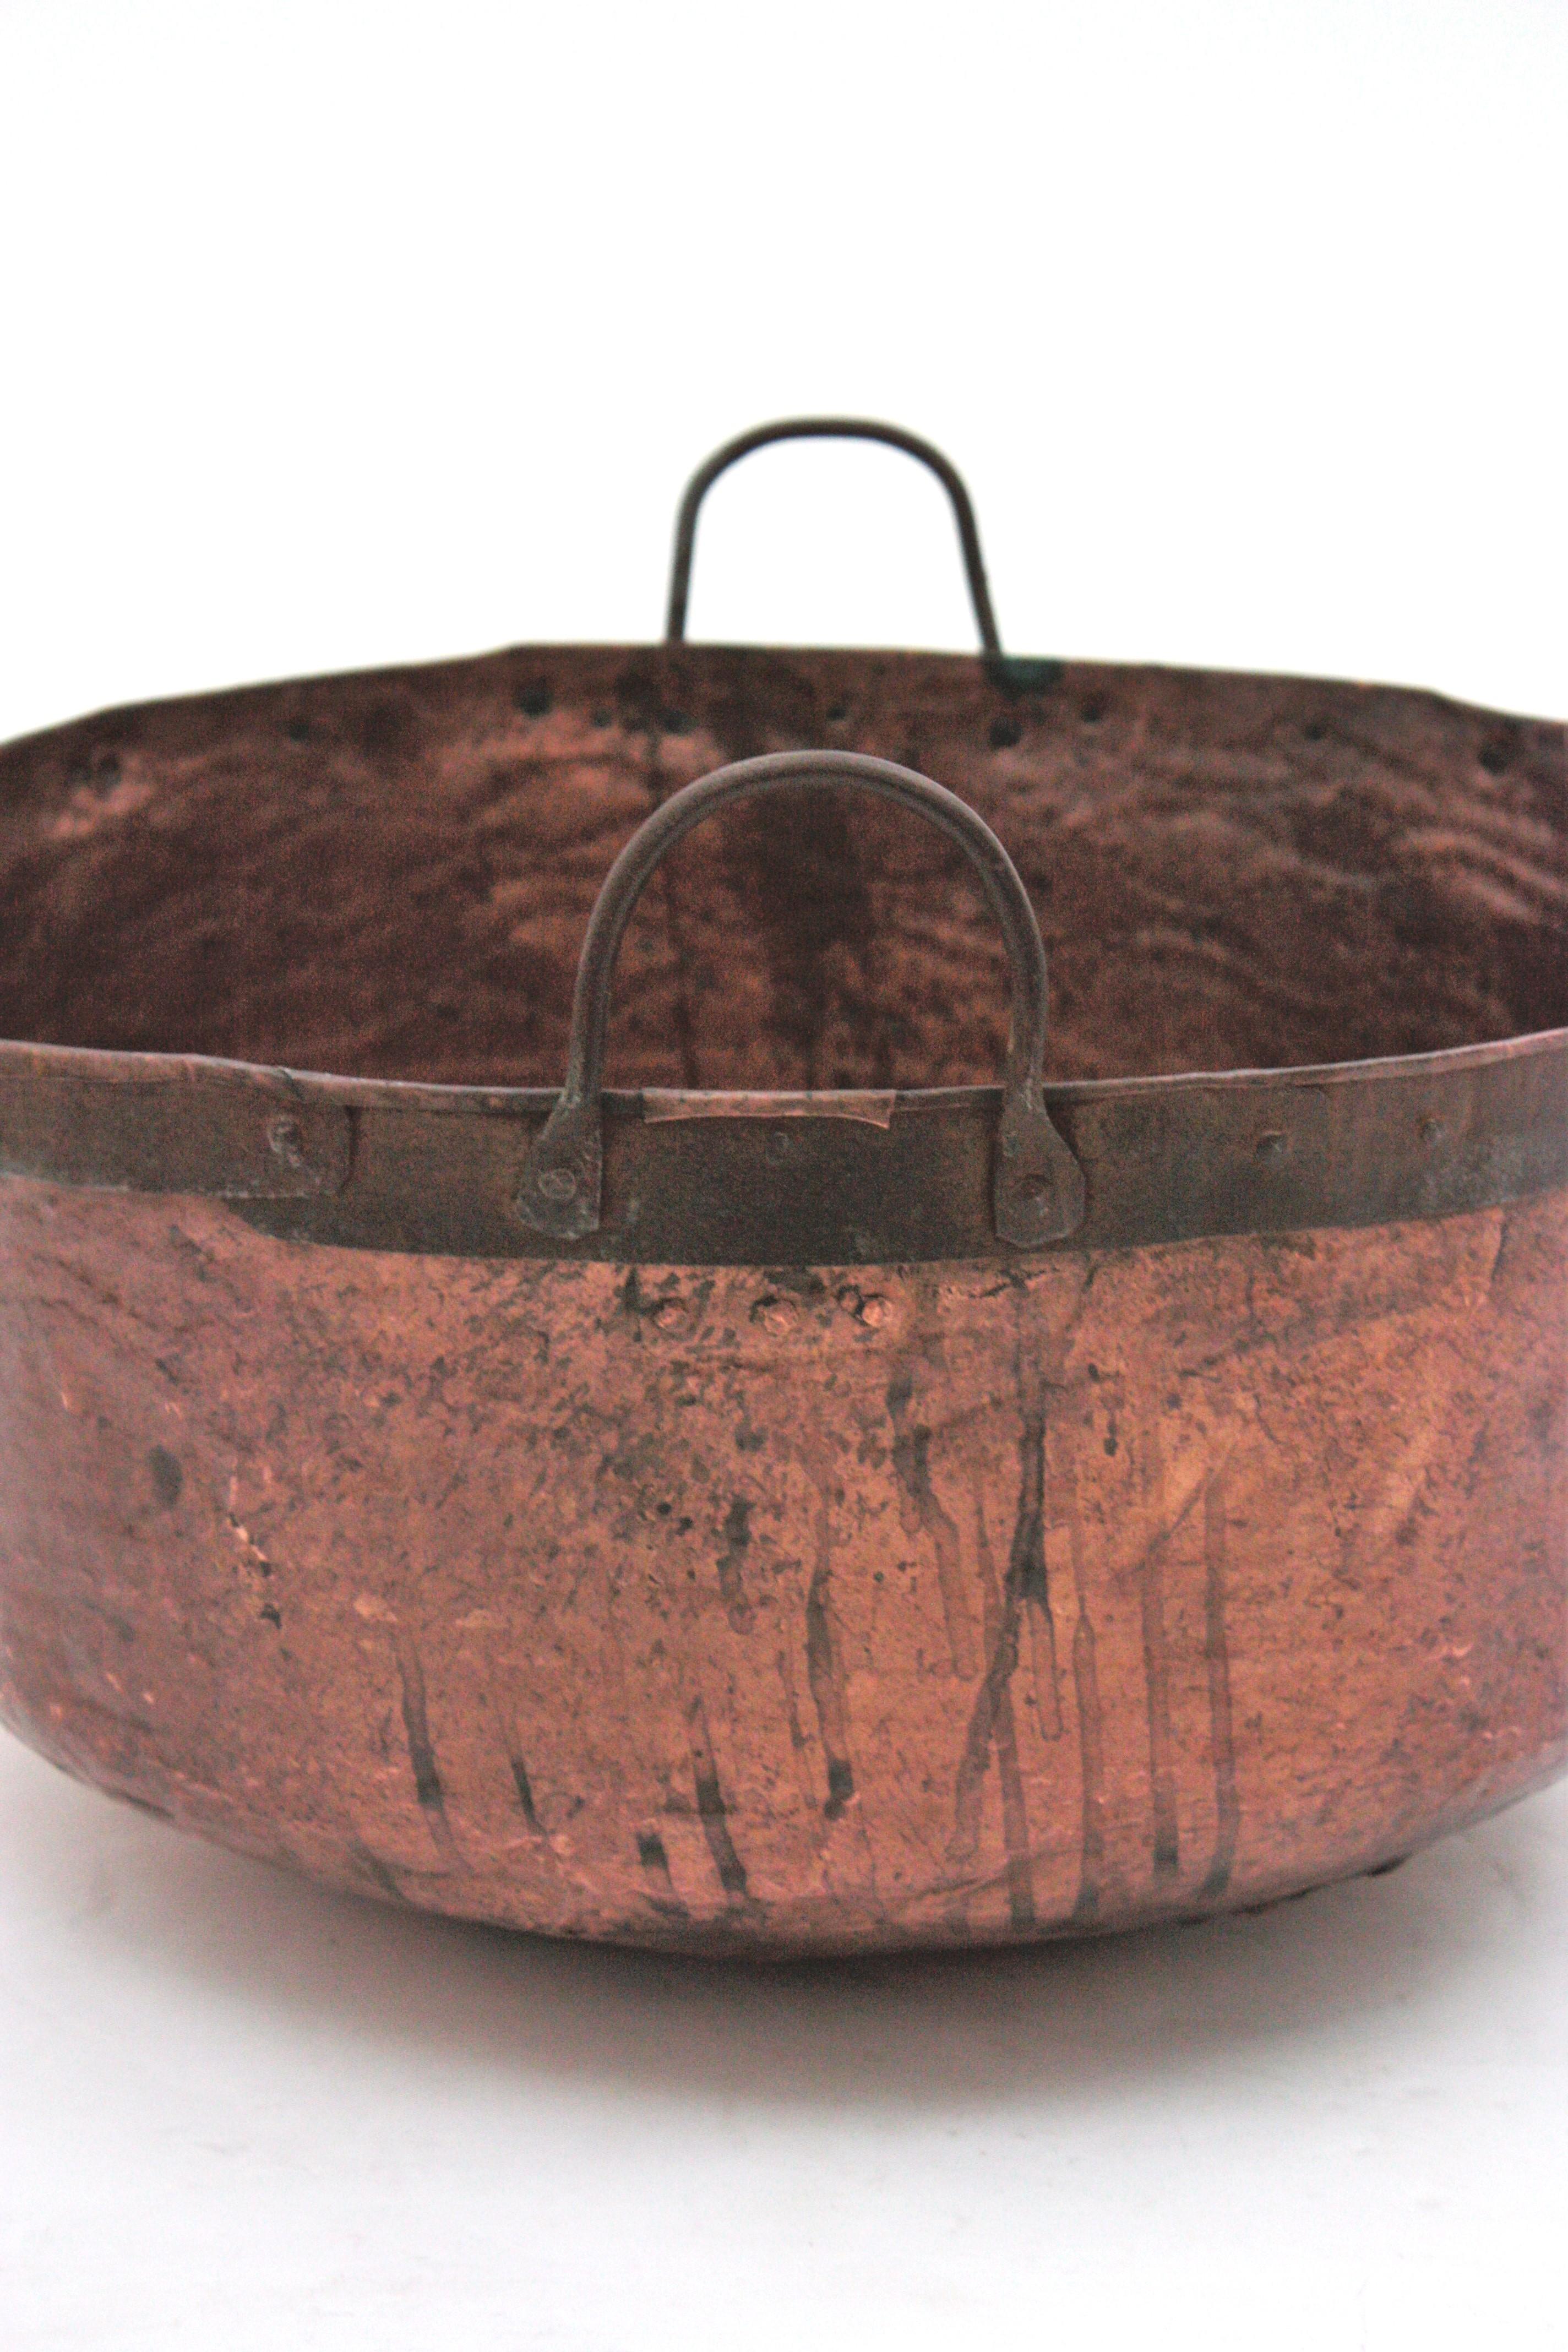 Massive French Copper Cauldron Pot with Iron Handles For Sale 7